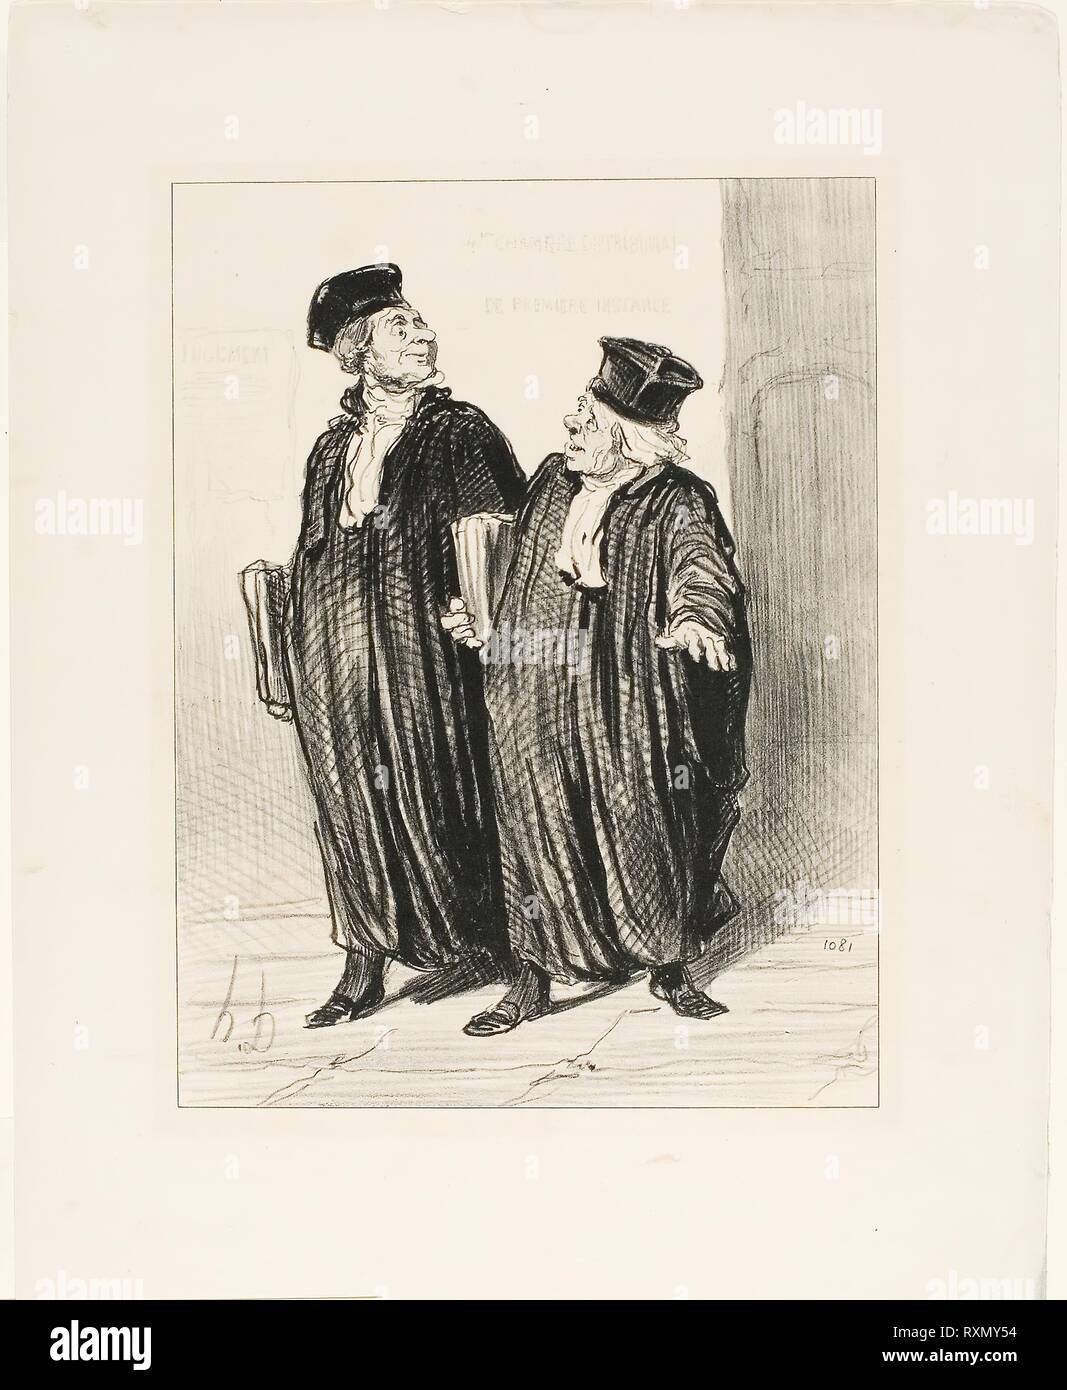 '- Finally we obtained the division of property between husband and wife... - about time, there was no more money left to divide,' plate 3 from Les Avocats Et Les Plaideurs. Honoré Victorin Daumier; French, 1808-1879. Date: 1851. Dimensions: 241 × 183 mm (image); 360 × 270 mm (sheet). Lithograph in black on white wove paper. Origin: France. Museum: The Chicago Art Institute. Author: Honoré-Victorin Daumier. Stock Photo